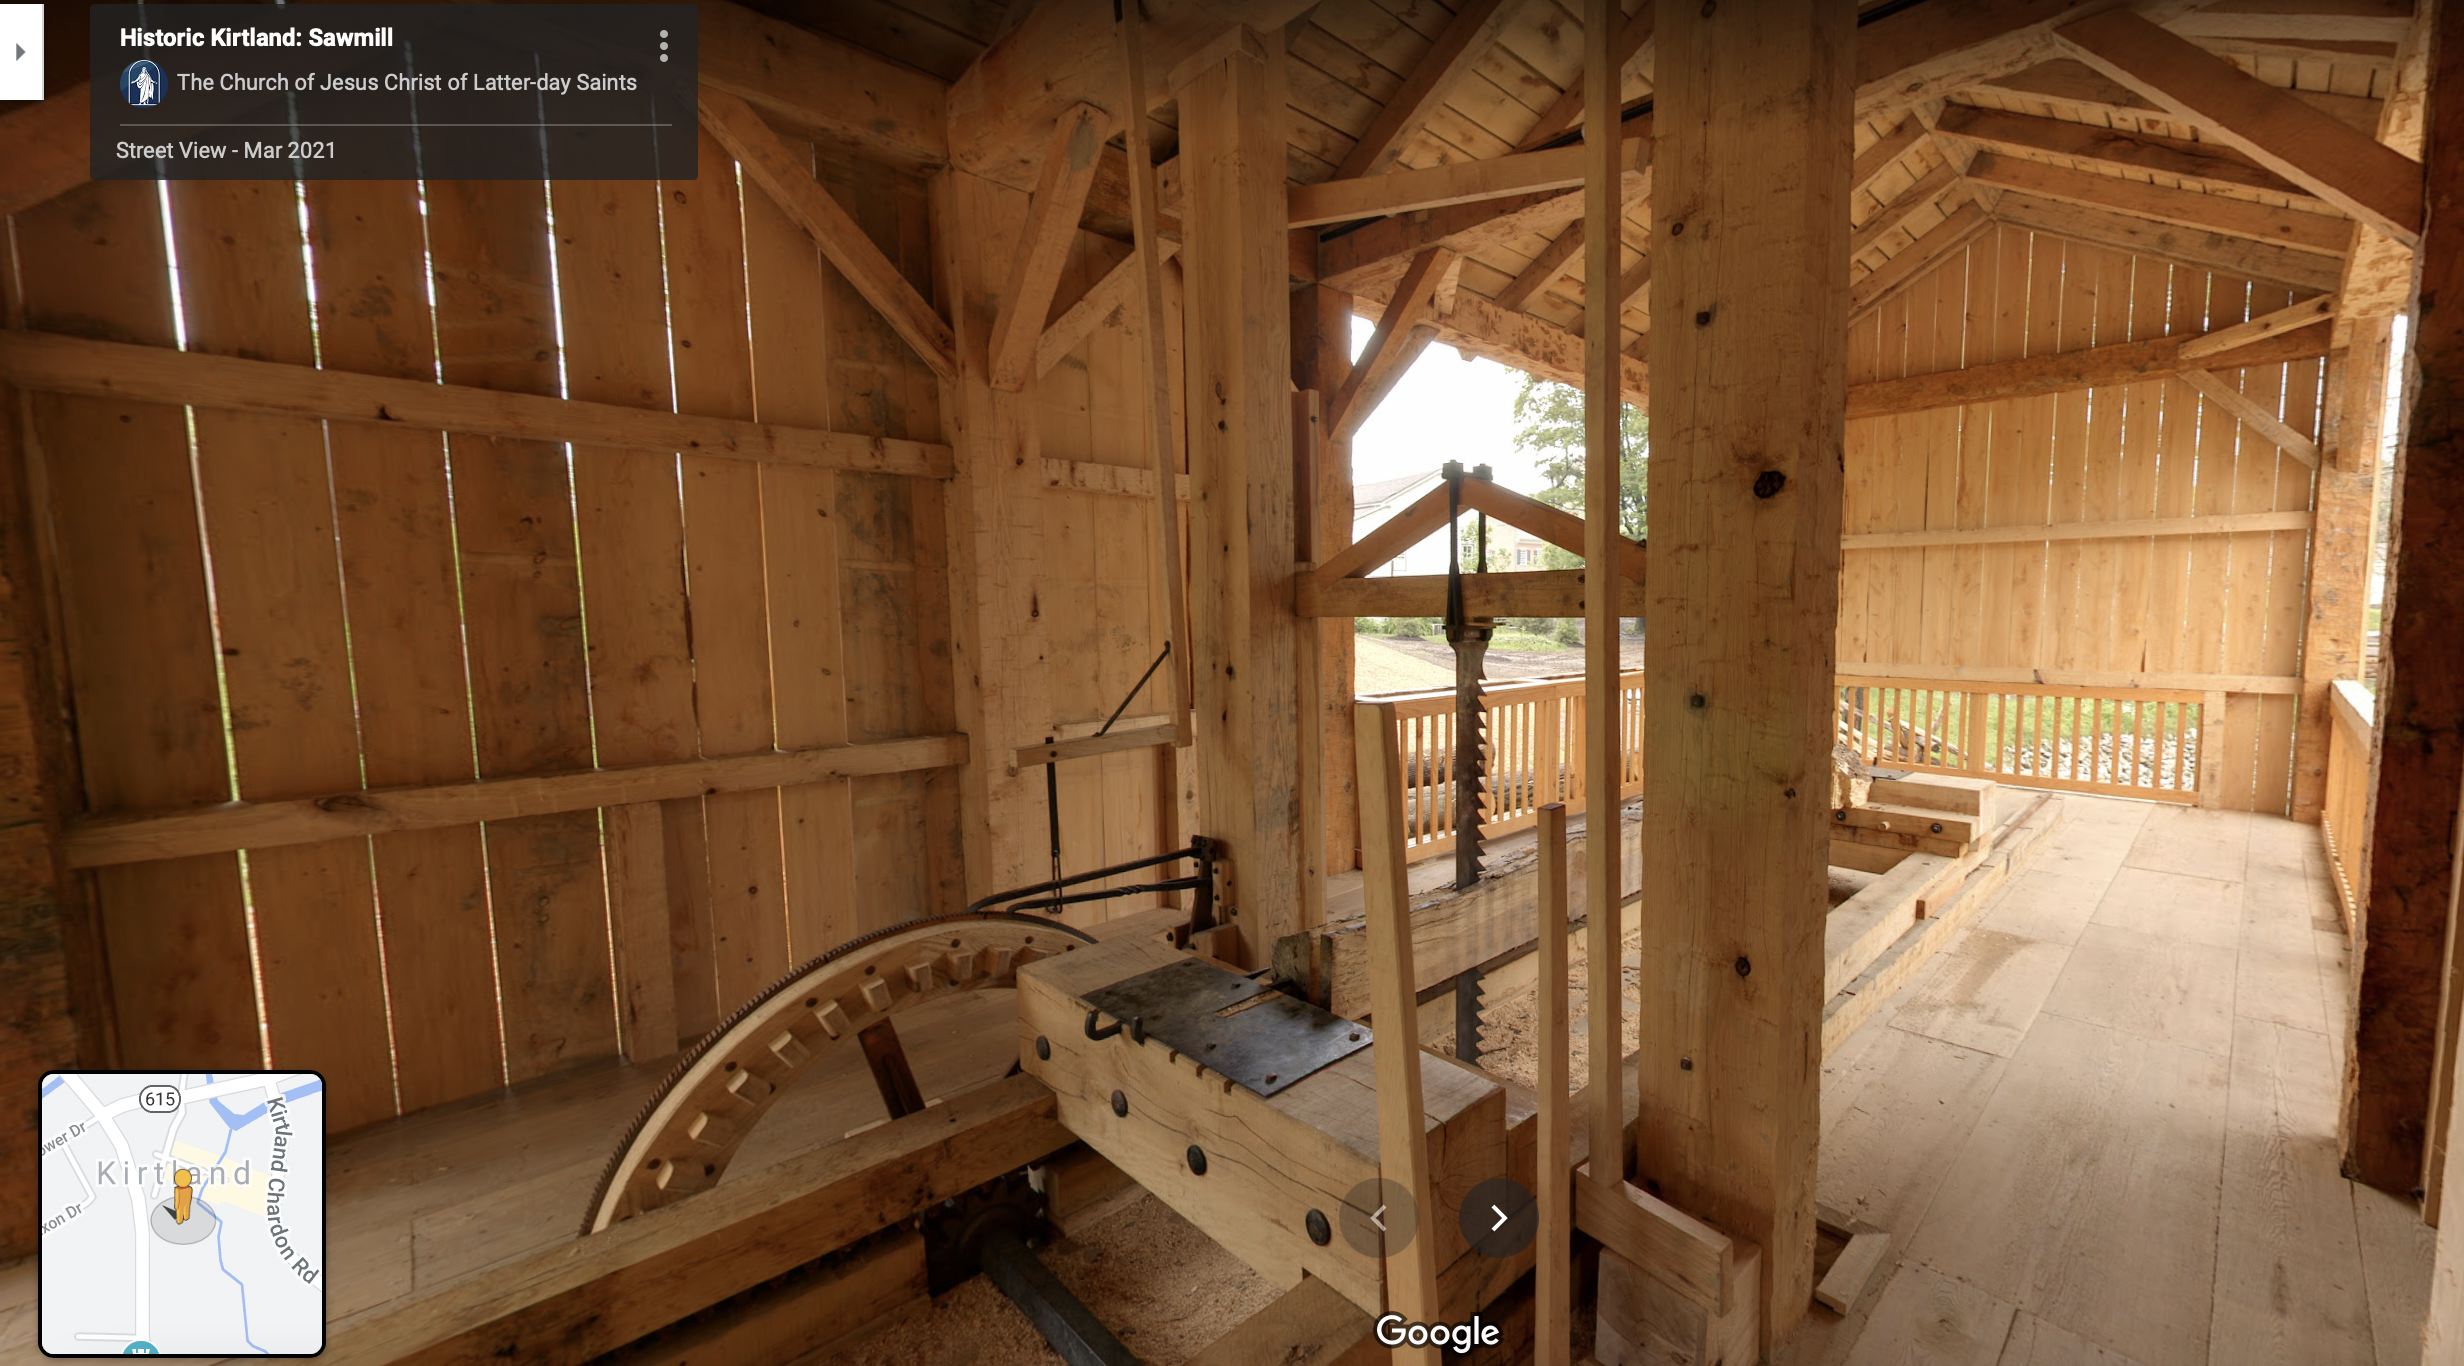 A screenshot of the 360 view of the Kirtland Sawmill on Google Maps